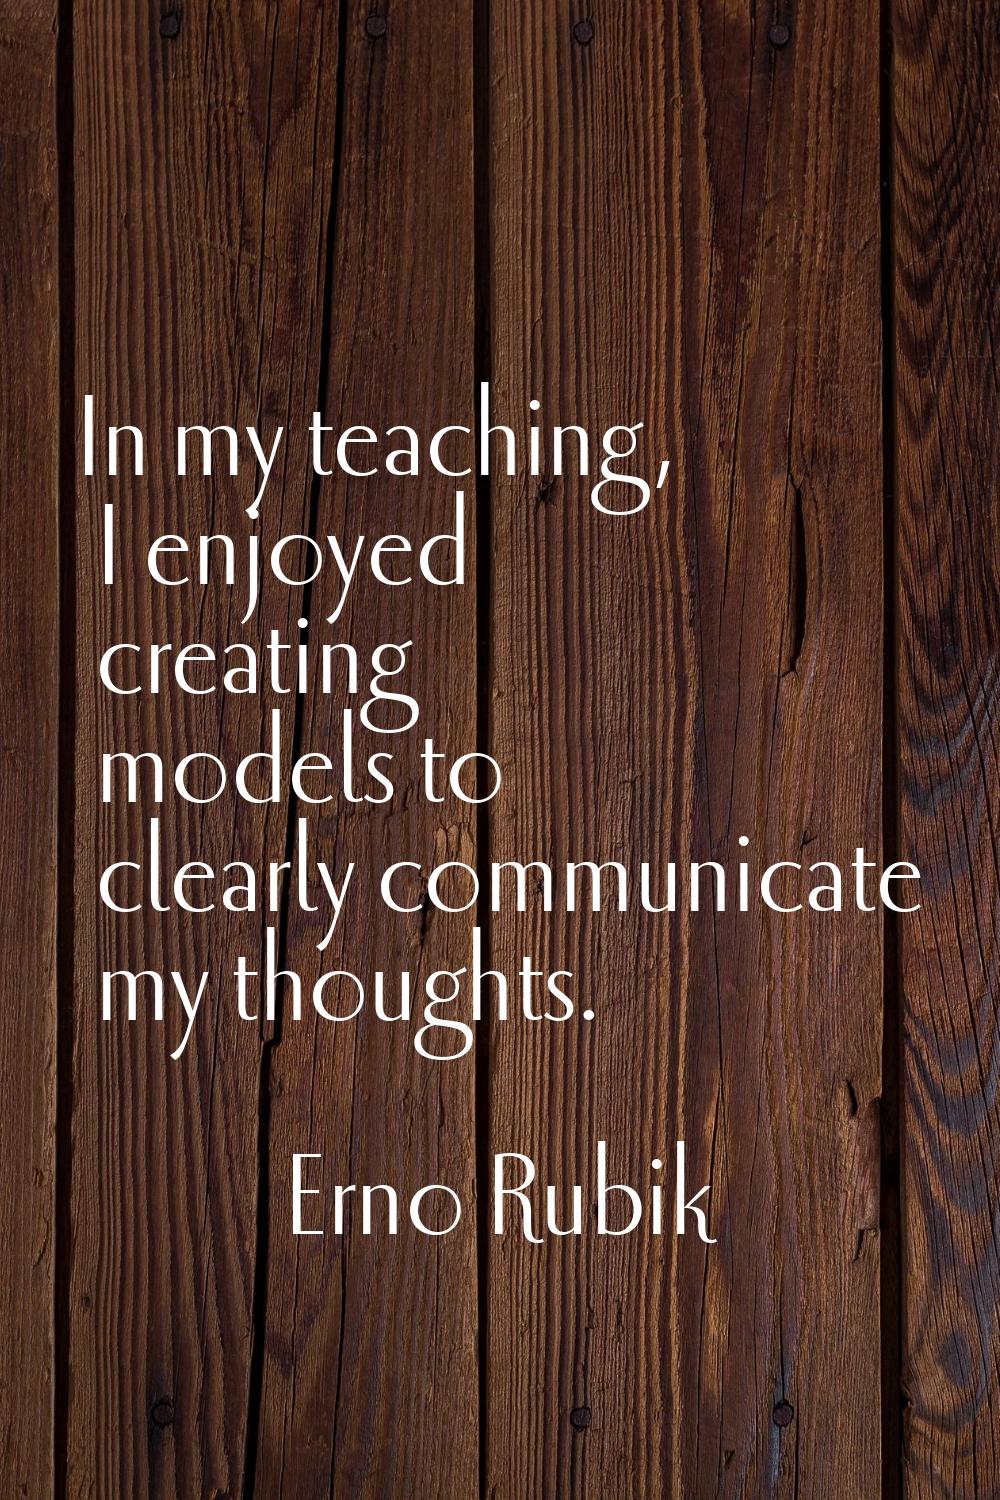 In my teaching, I enjoyed creating models to clearly communicate my thoughts.